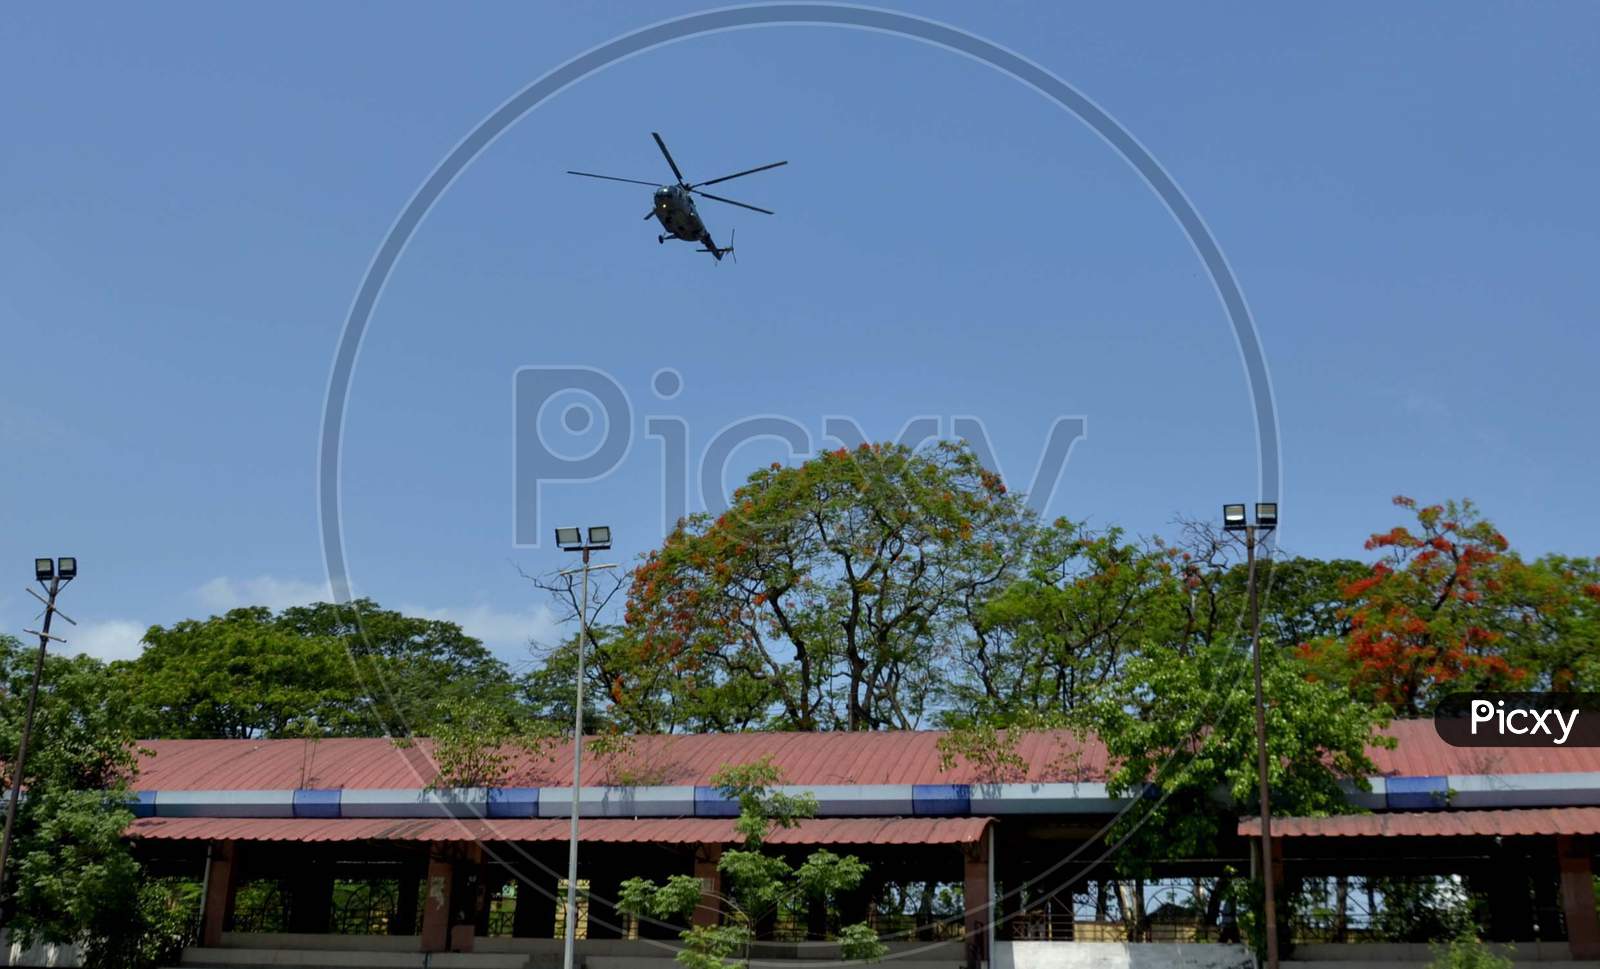 An Indian Air Forces Chopper Over The City Skyline To Express Gratitude